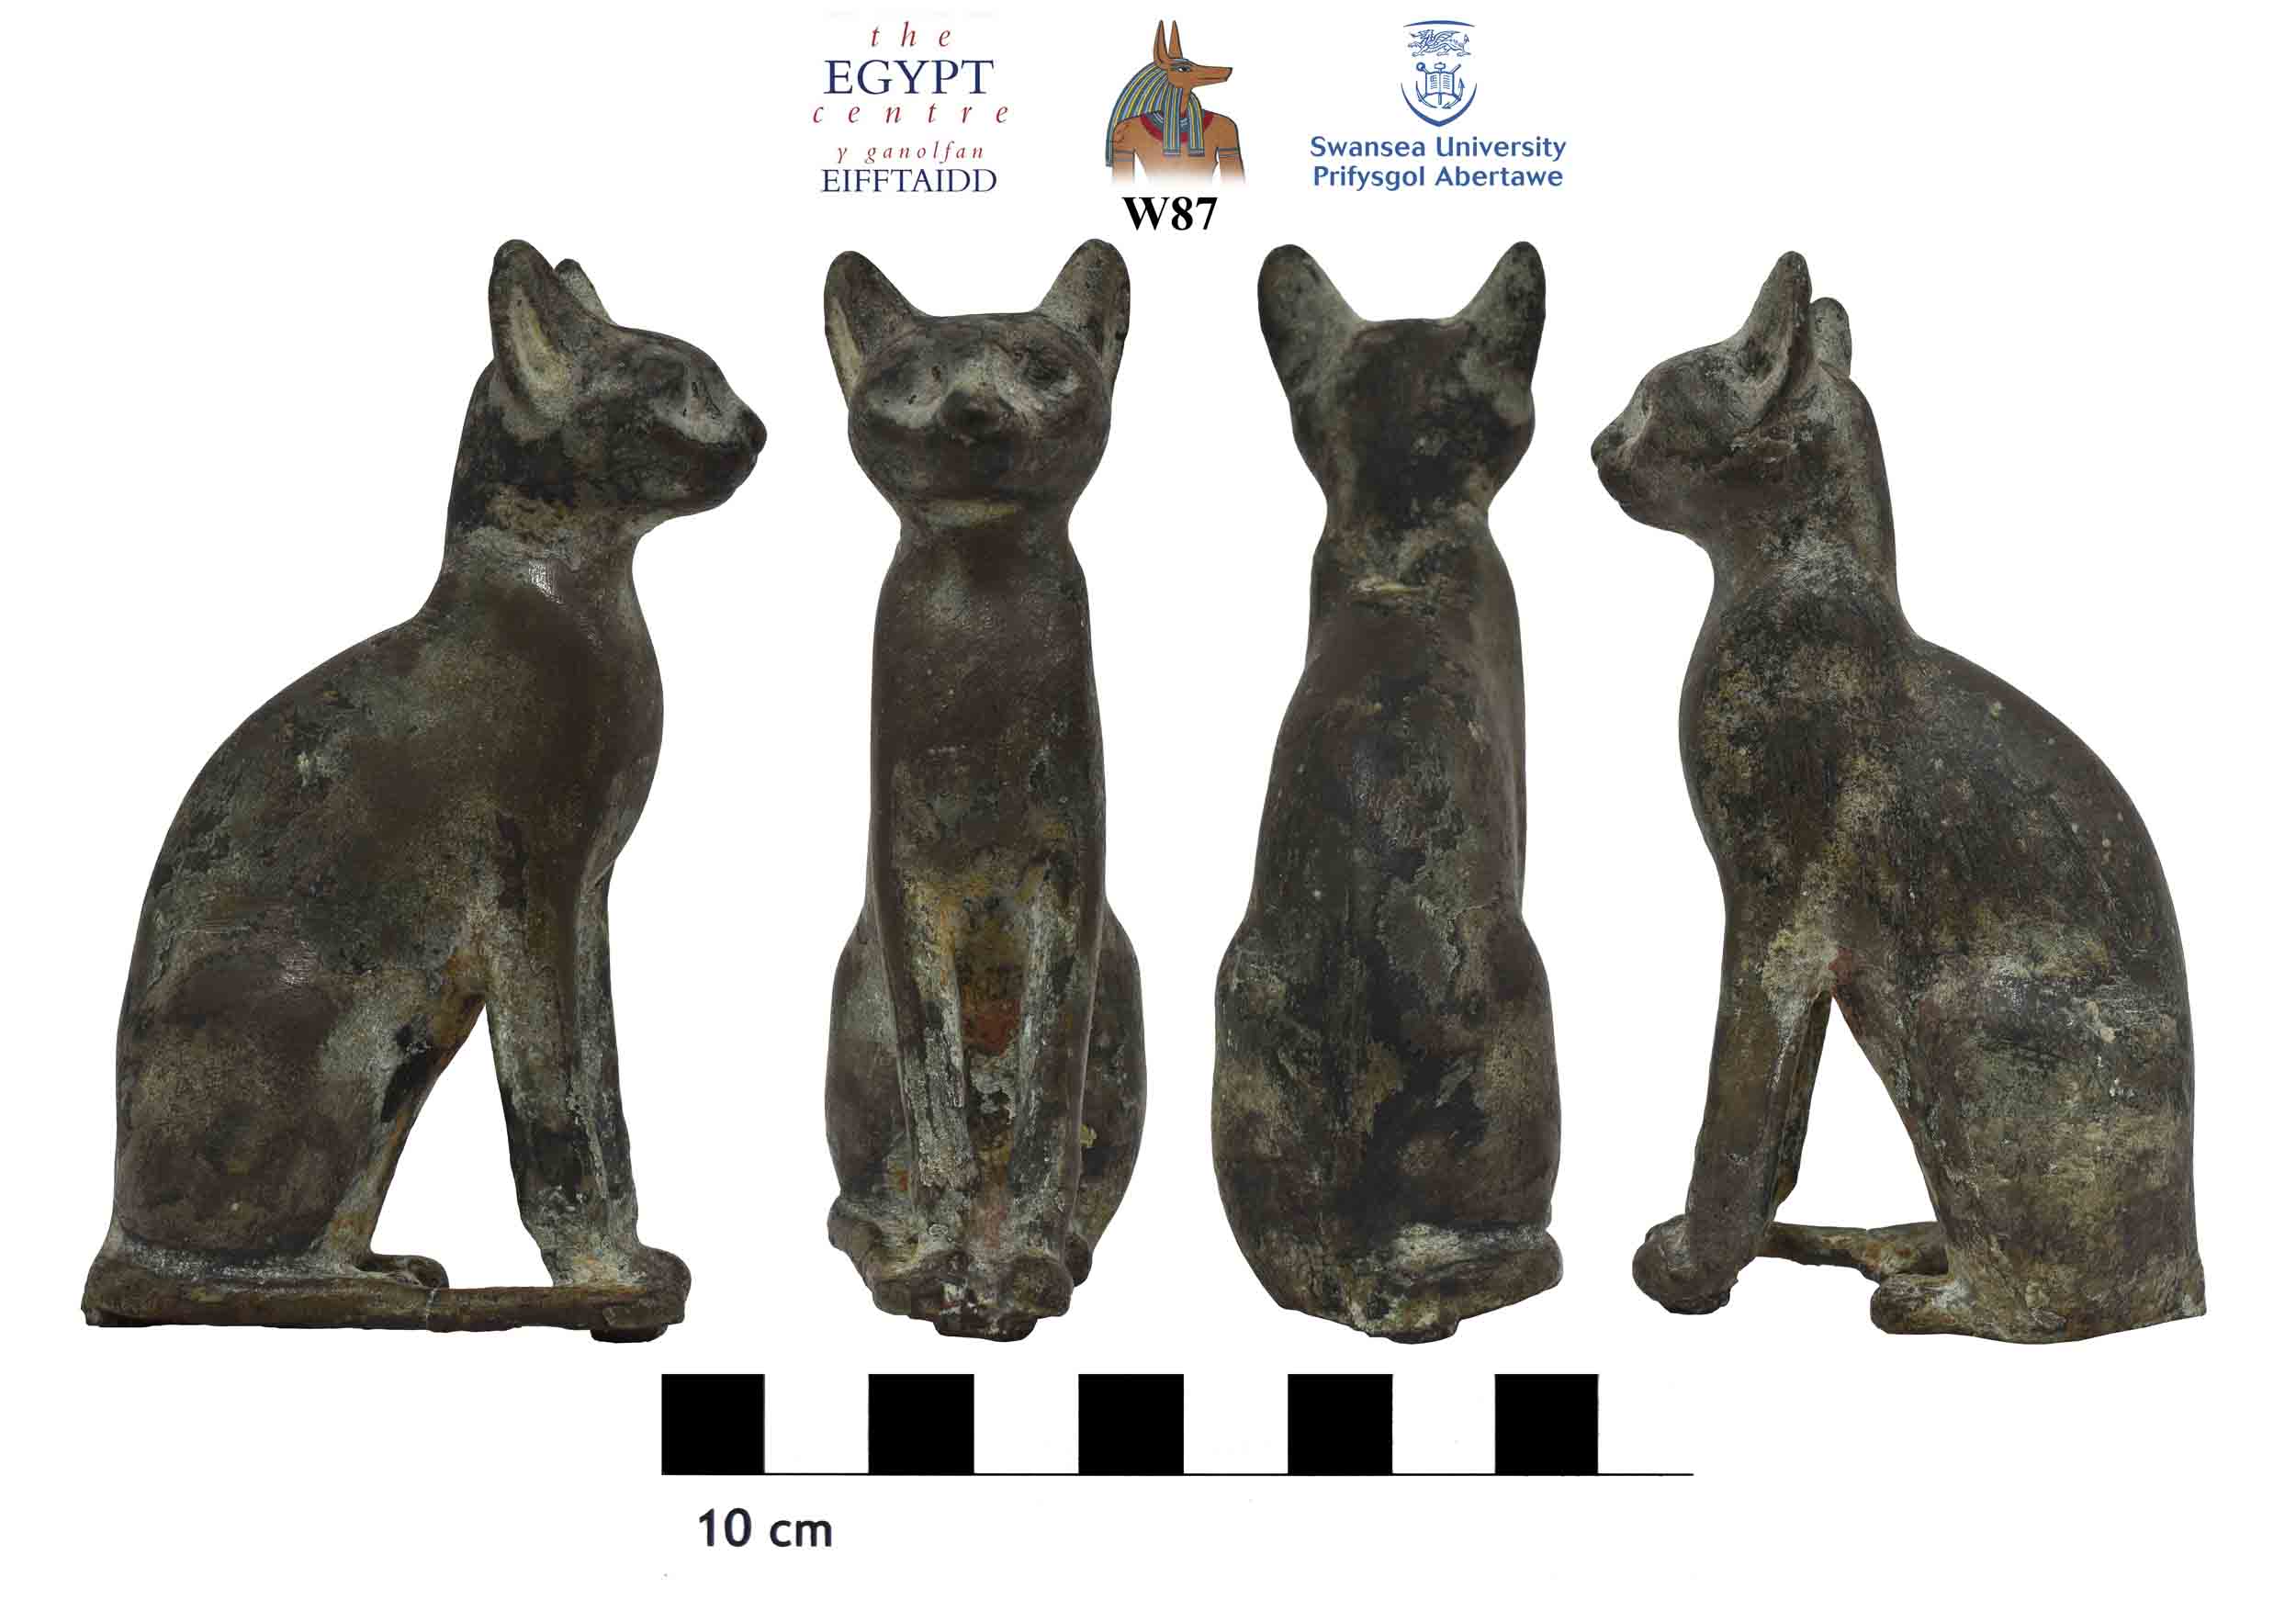 Image for: Statue of a cat